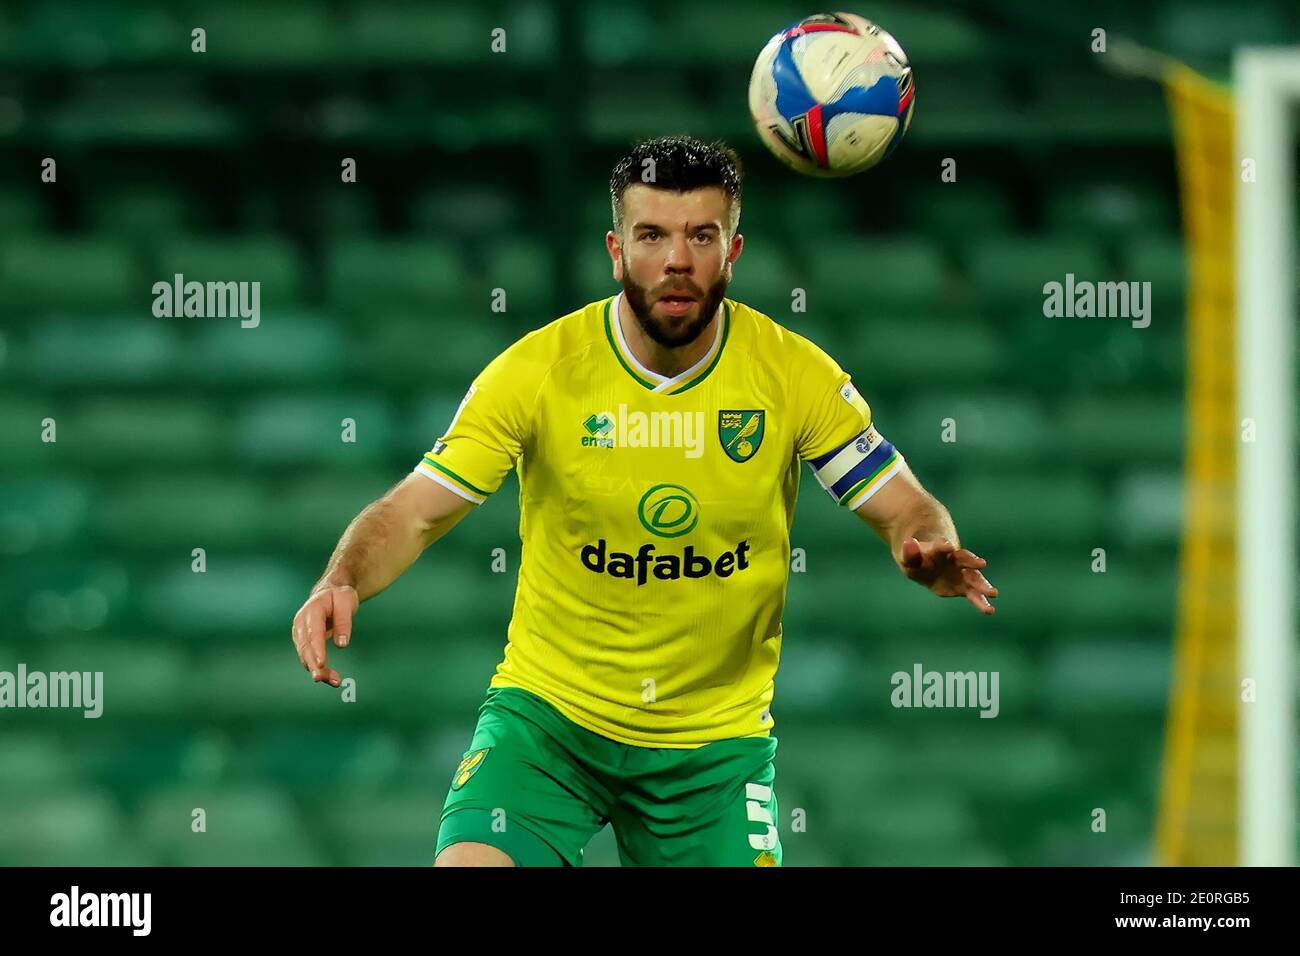 2nd January 2021; Carrow Road, Norwich, Norfolk, England, English Football League Championship Football, Norwich versus Barnsley; Grant Hanley of Norwich City prepares to head the ball carefully after suffering a head injury Stock Photo